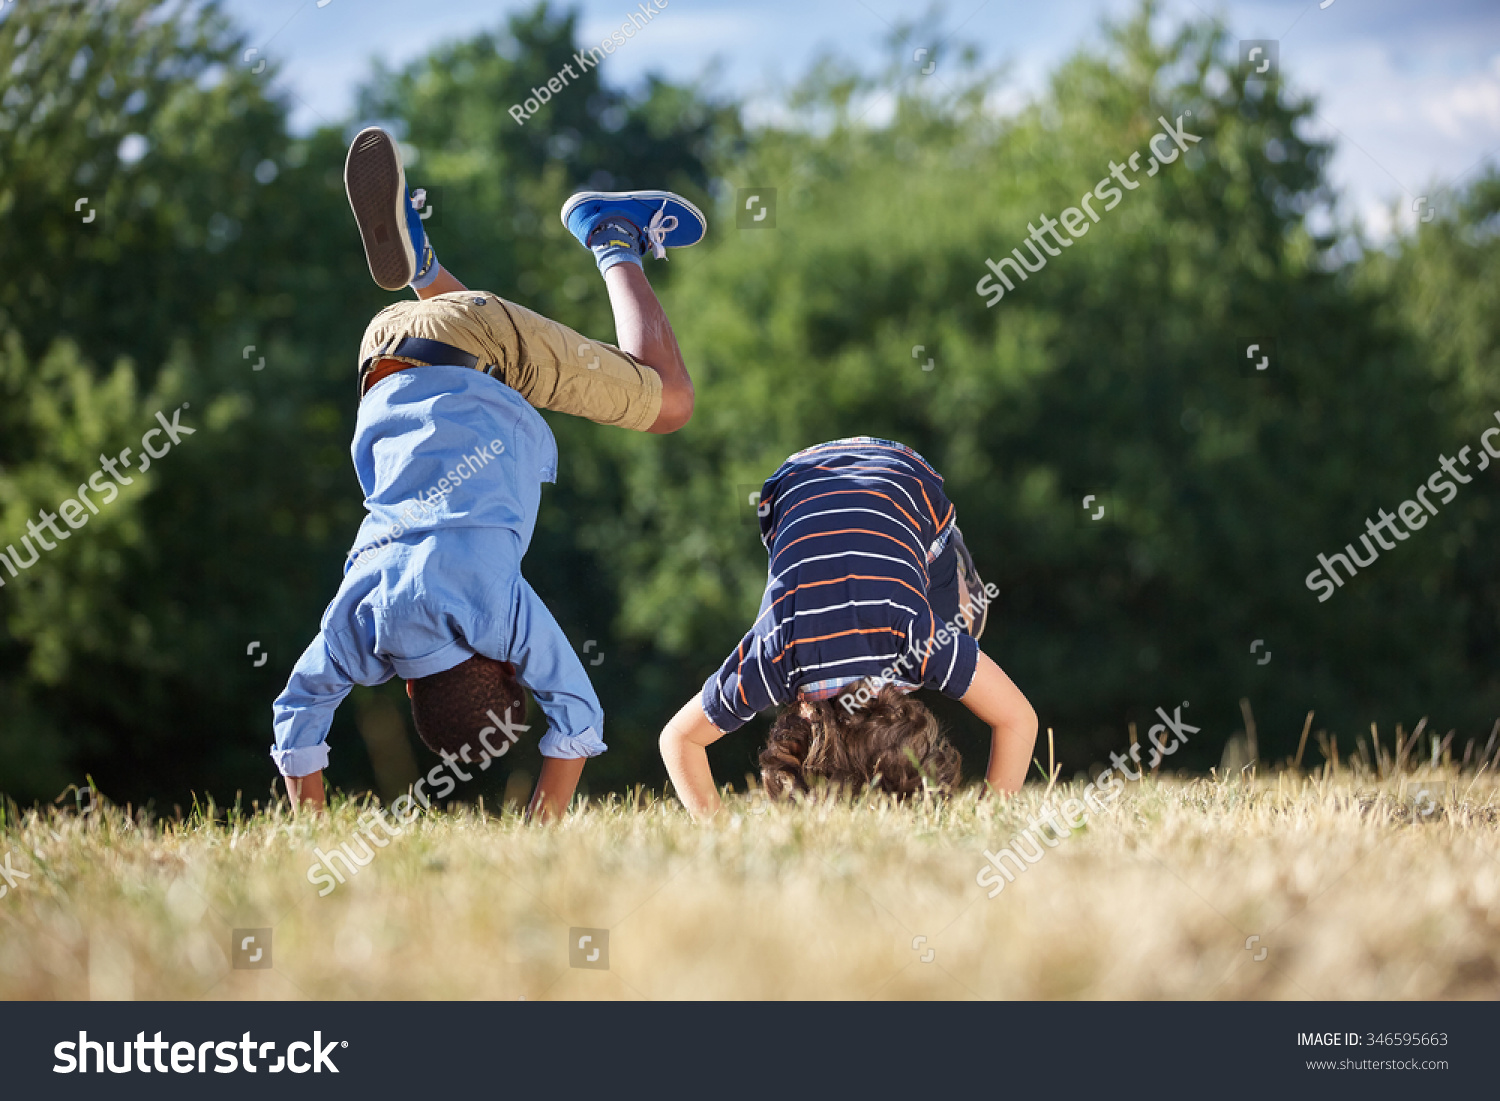 Two boys making a somersault and having fun at the park #346595663